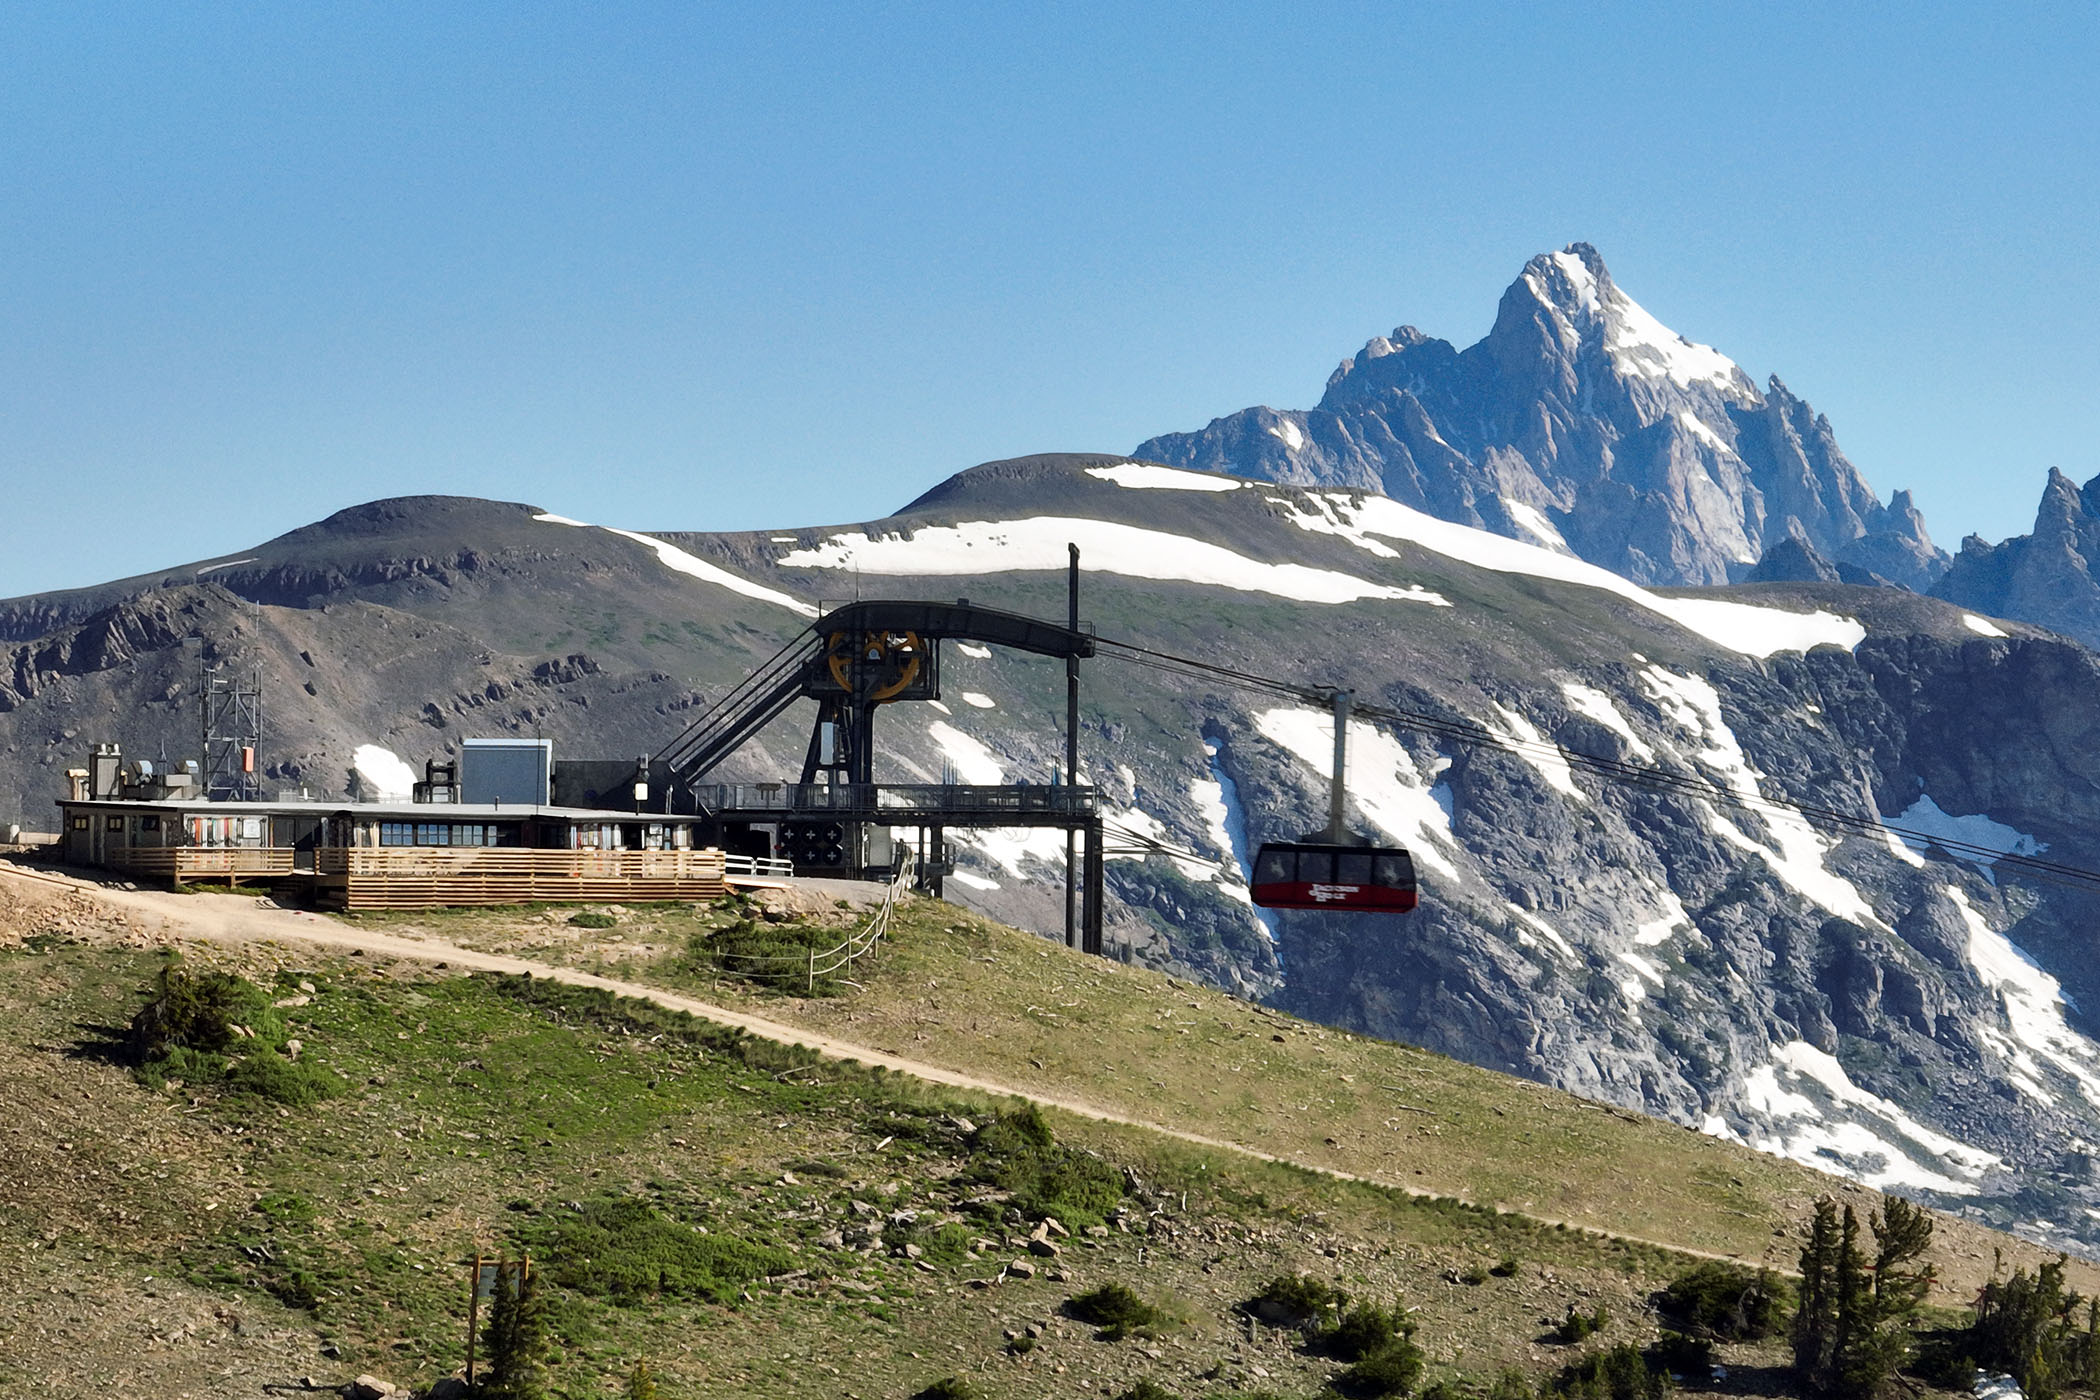 The Aerial tram approaching the summit with the Grand Teton in the background